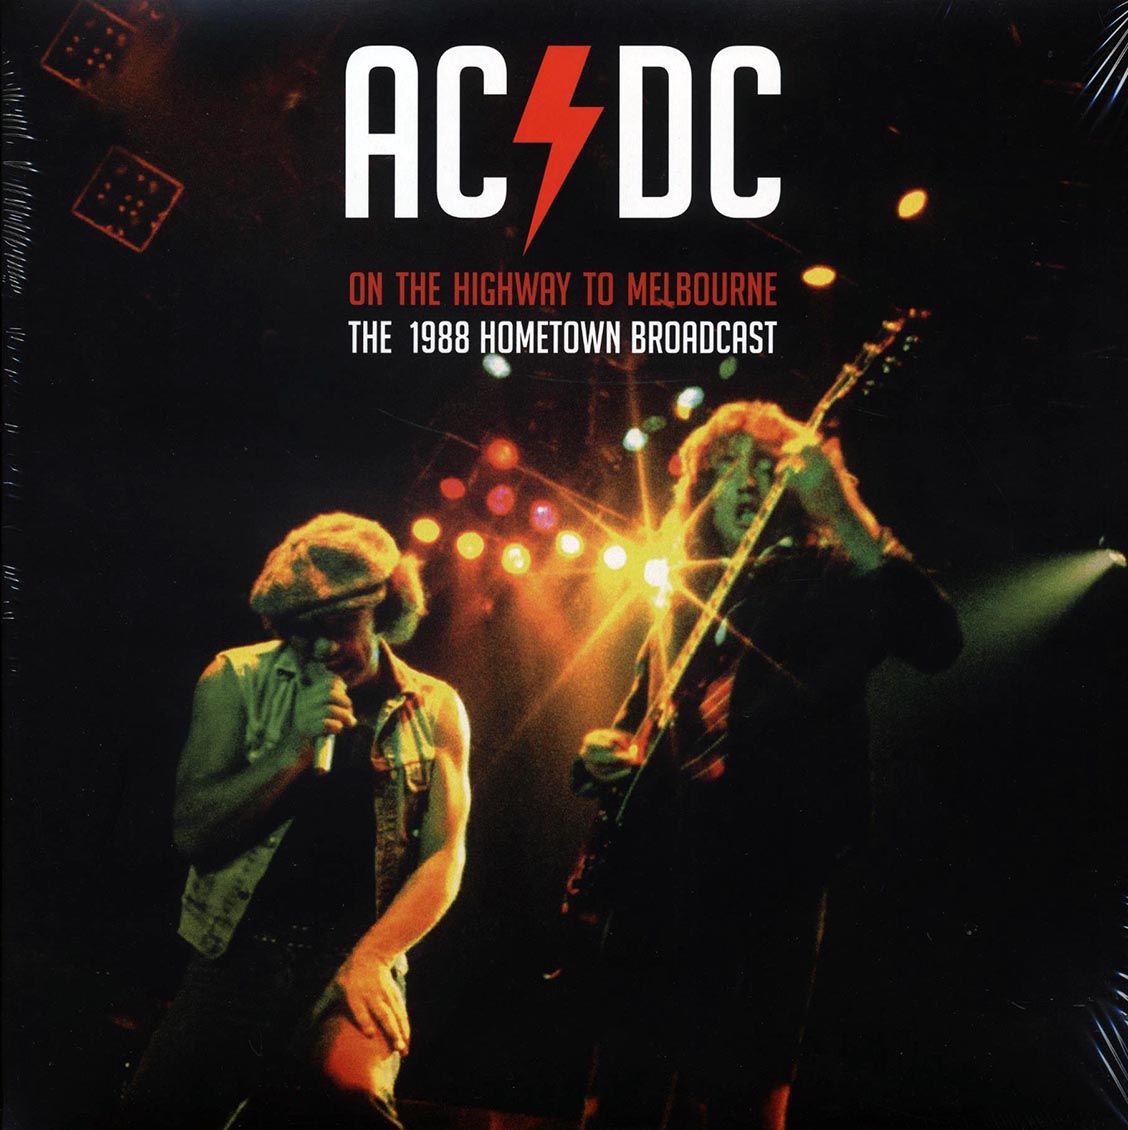 AC/DC - On The Highway To Melbourne: The 1988 Hometown Broadcast 2xLP Vinyl | Parachute, 1988